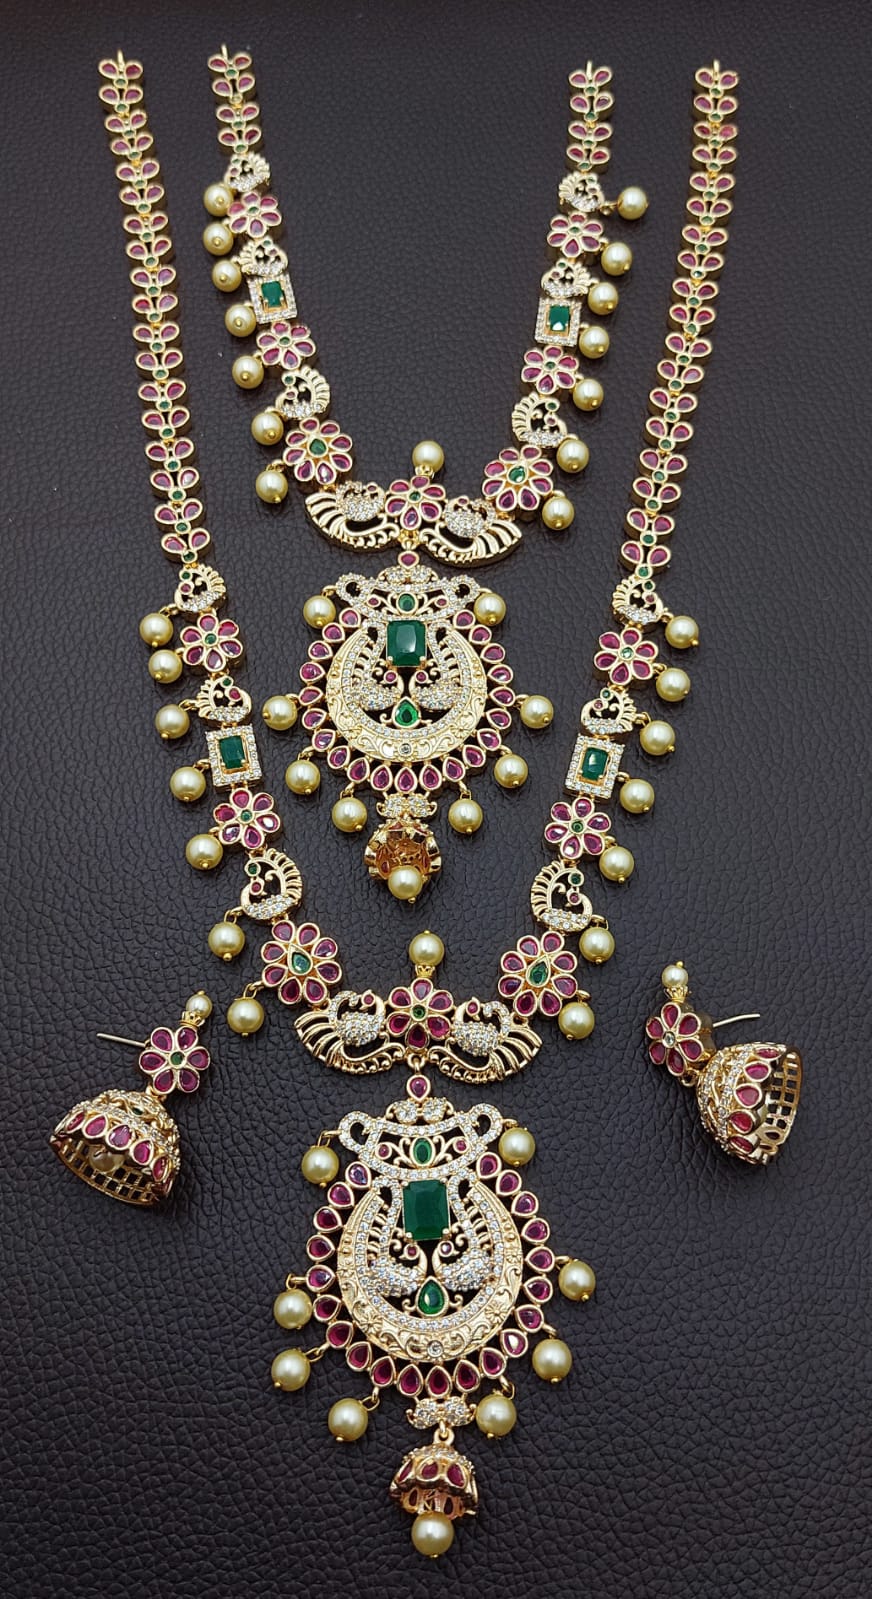 Exquisite, Trending American Diamond Cz Stone Jewelry Long and Short Peacock Necklace Combo Set with Jhumkas